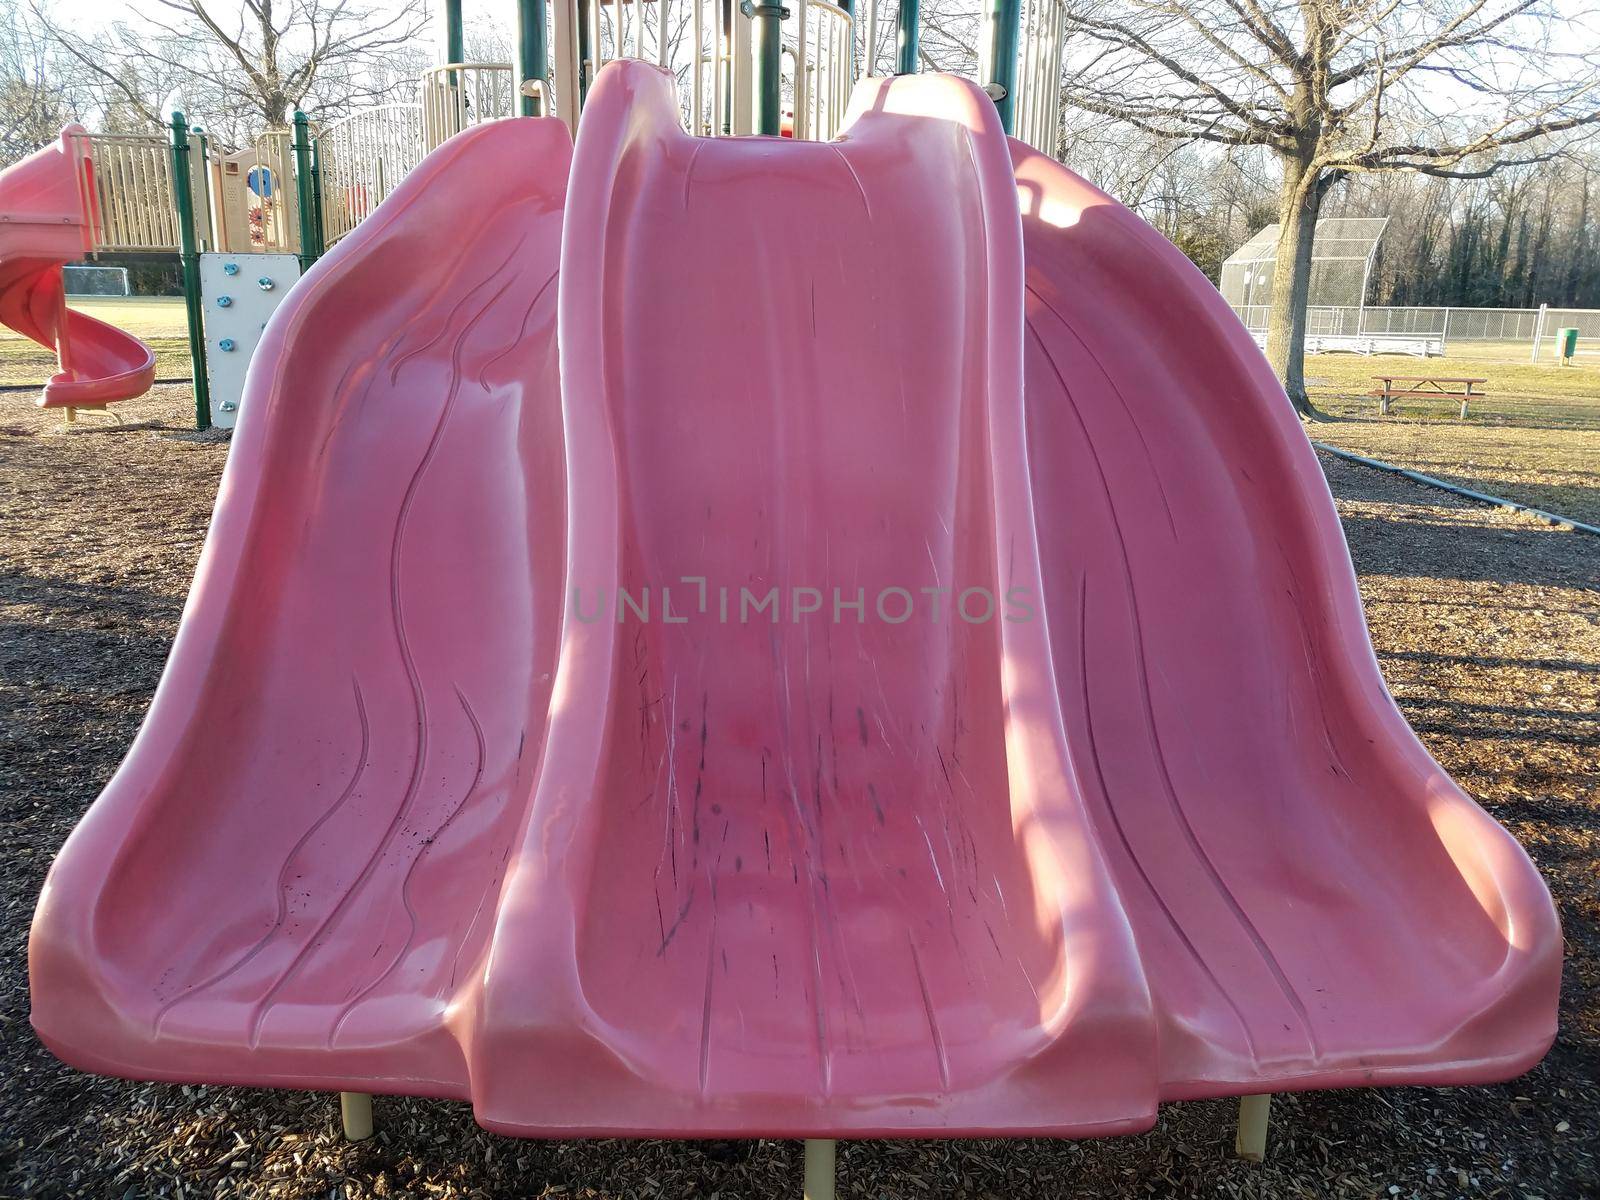 steep red or pink plastic slide at park playground